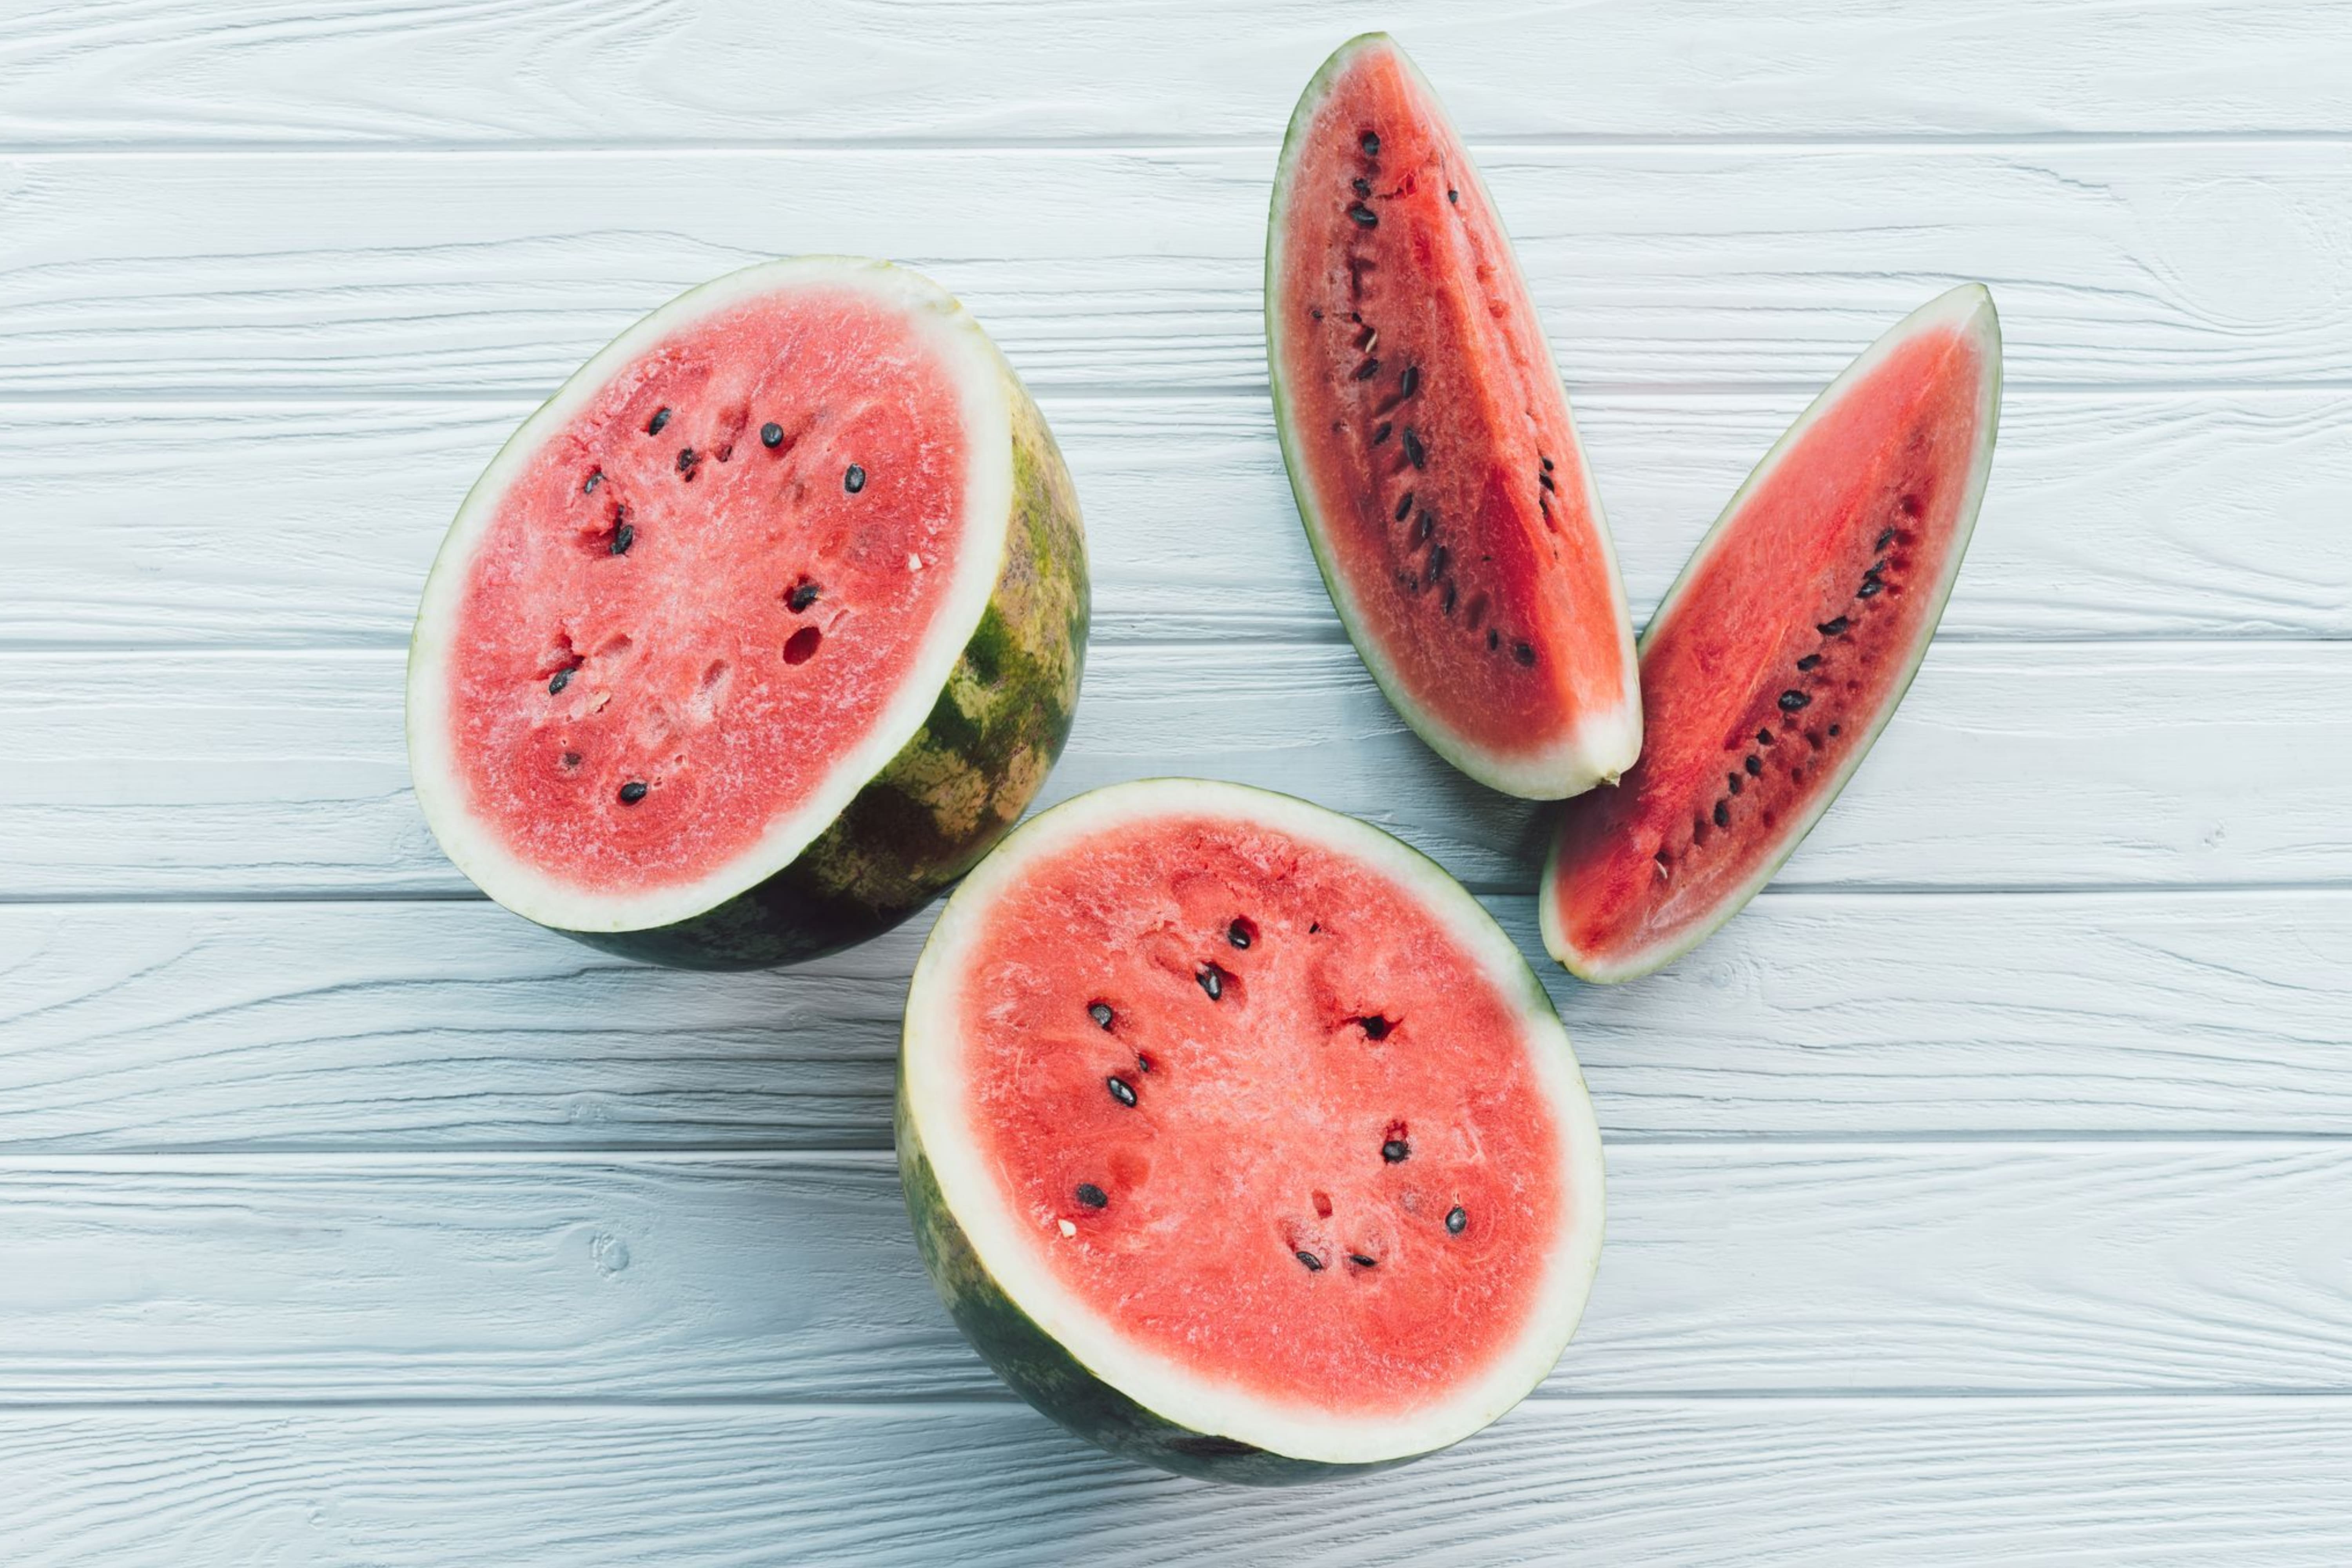 How To Tell If A Watermelon Has Gone Bad (15 signs)